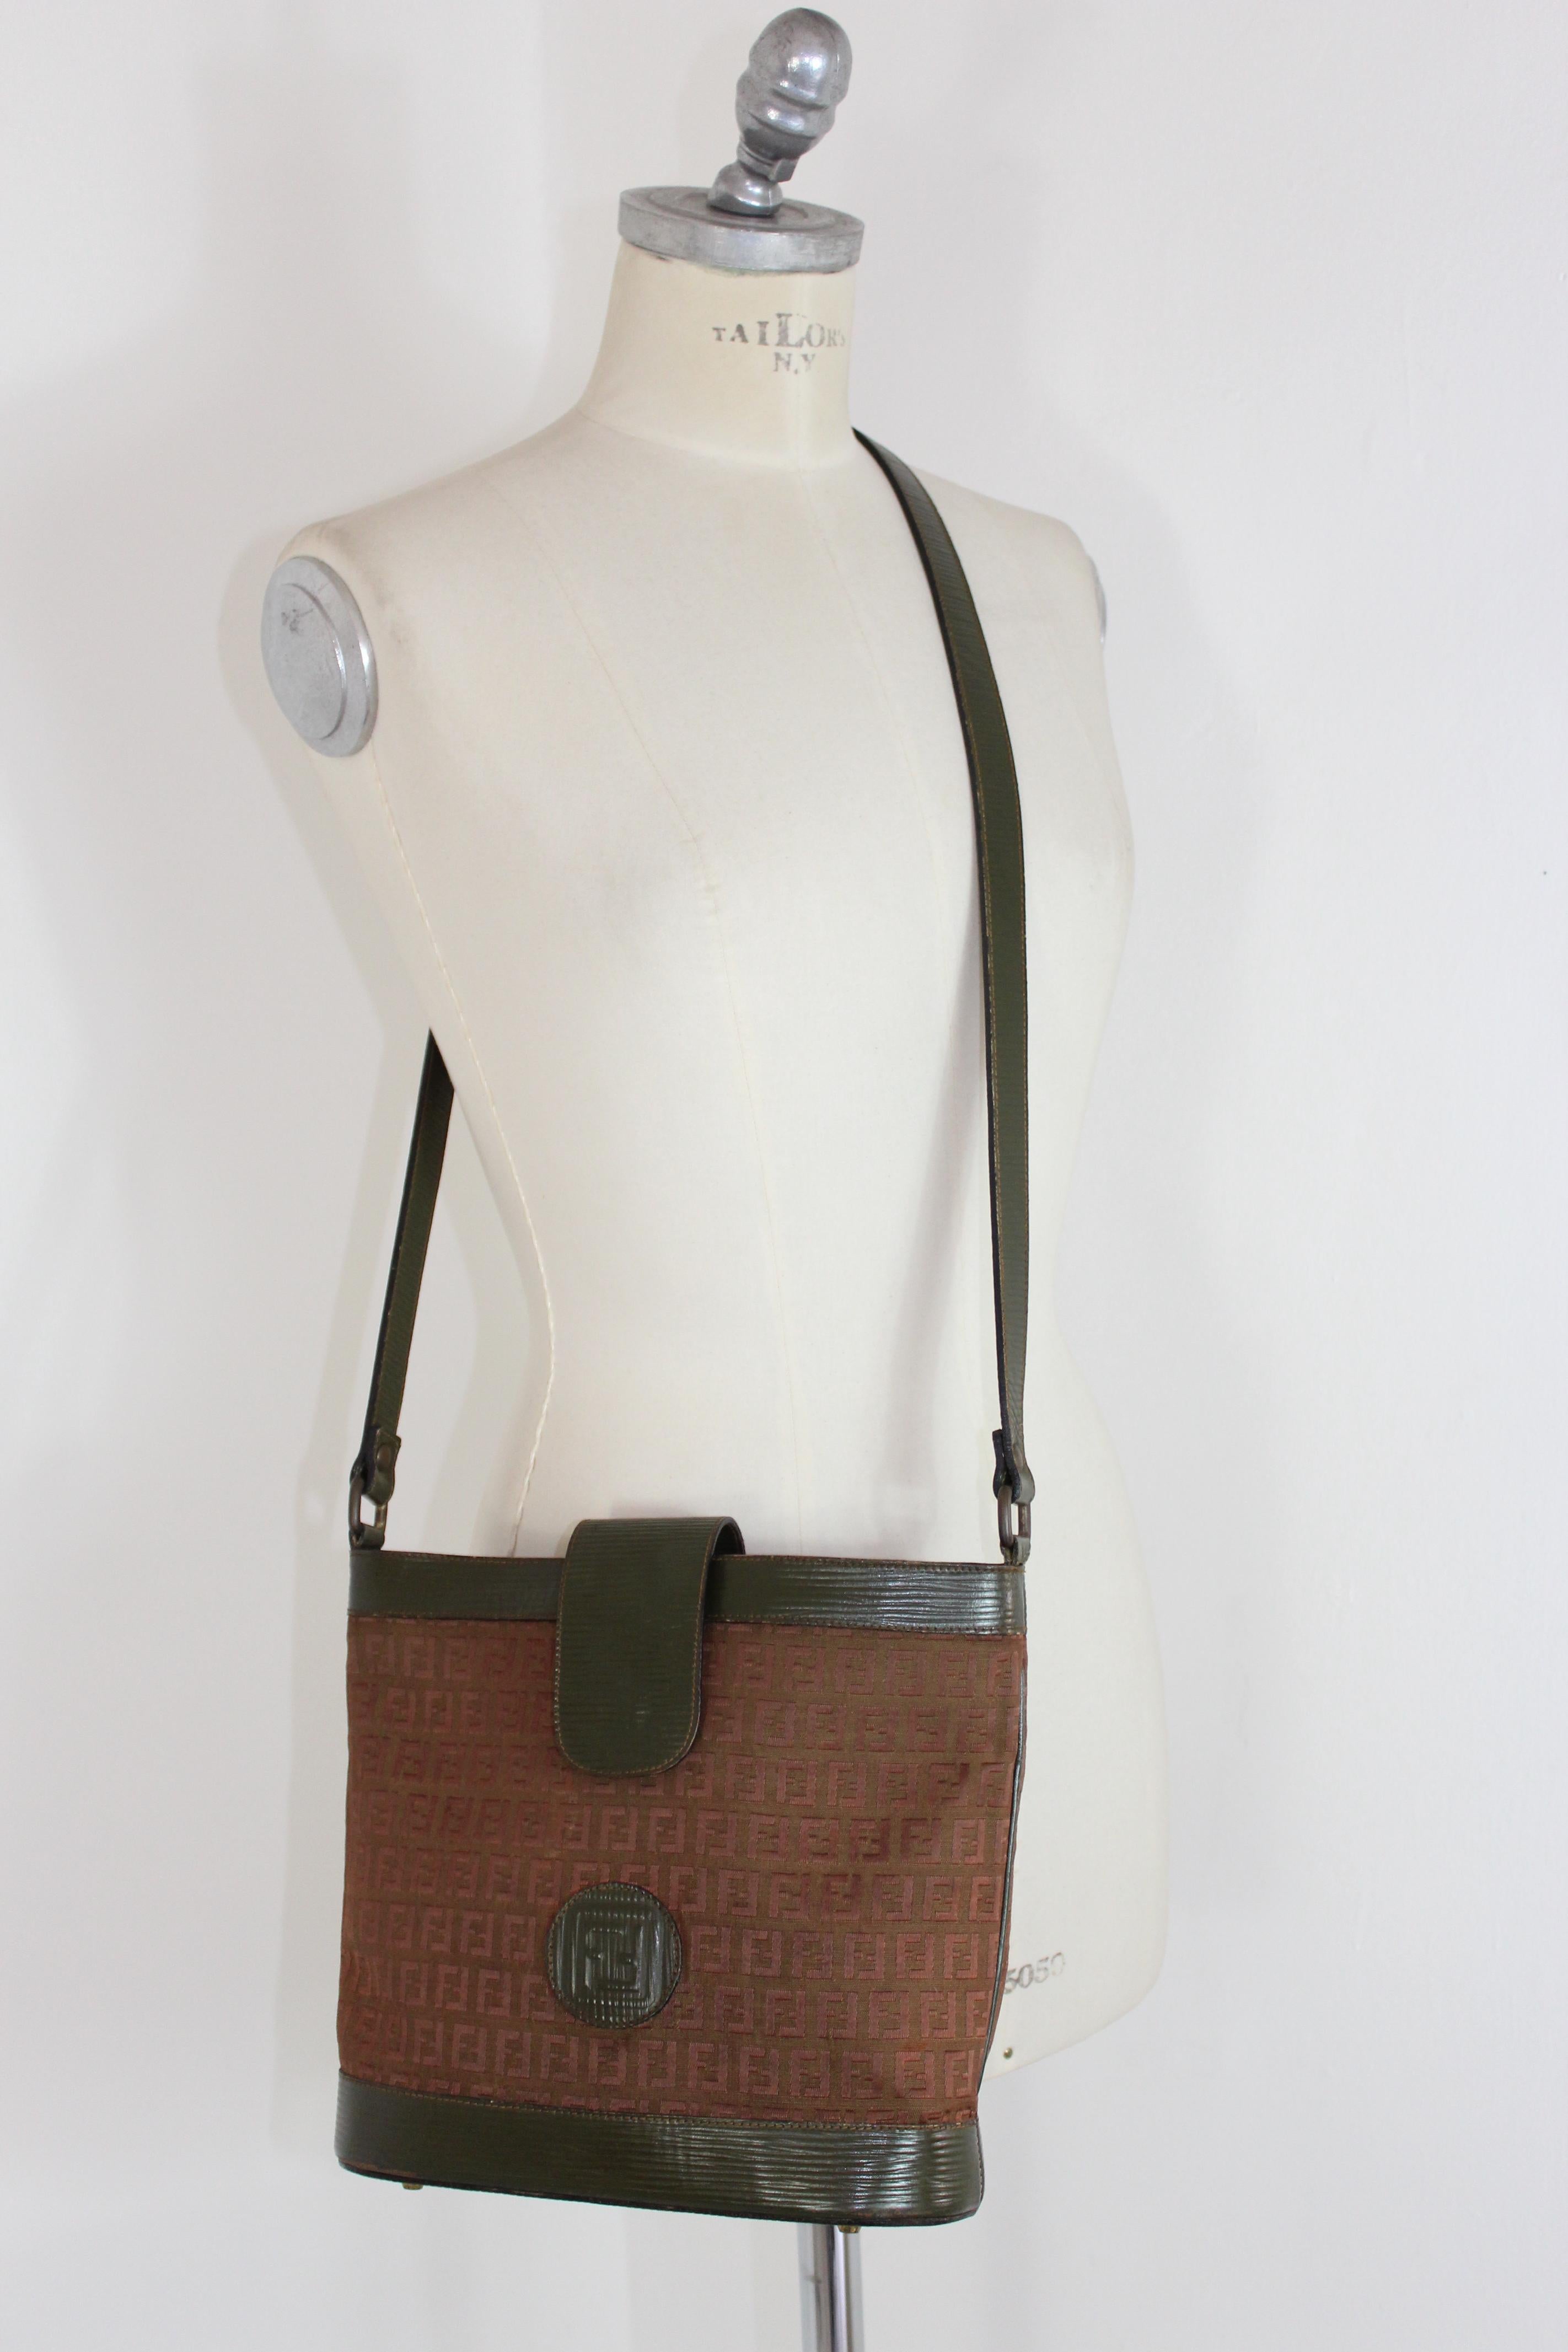 Fendi vintage 80s bag. Shoulder bucket bag, zucca monogram pattern, typical of the fashion house. Green and beige color. Fabric in leather and canvas. Closure with clip button. Adjustable shoulder strap. Made in Italy. Very good vintage condition,